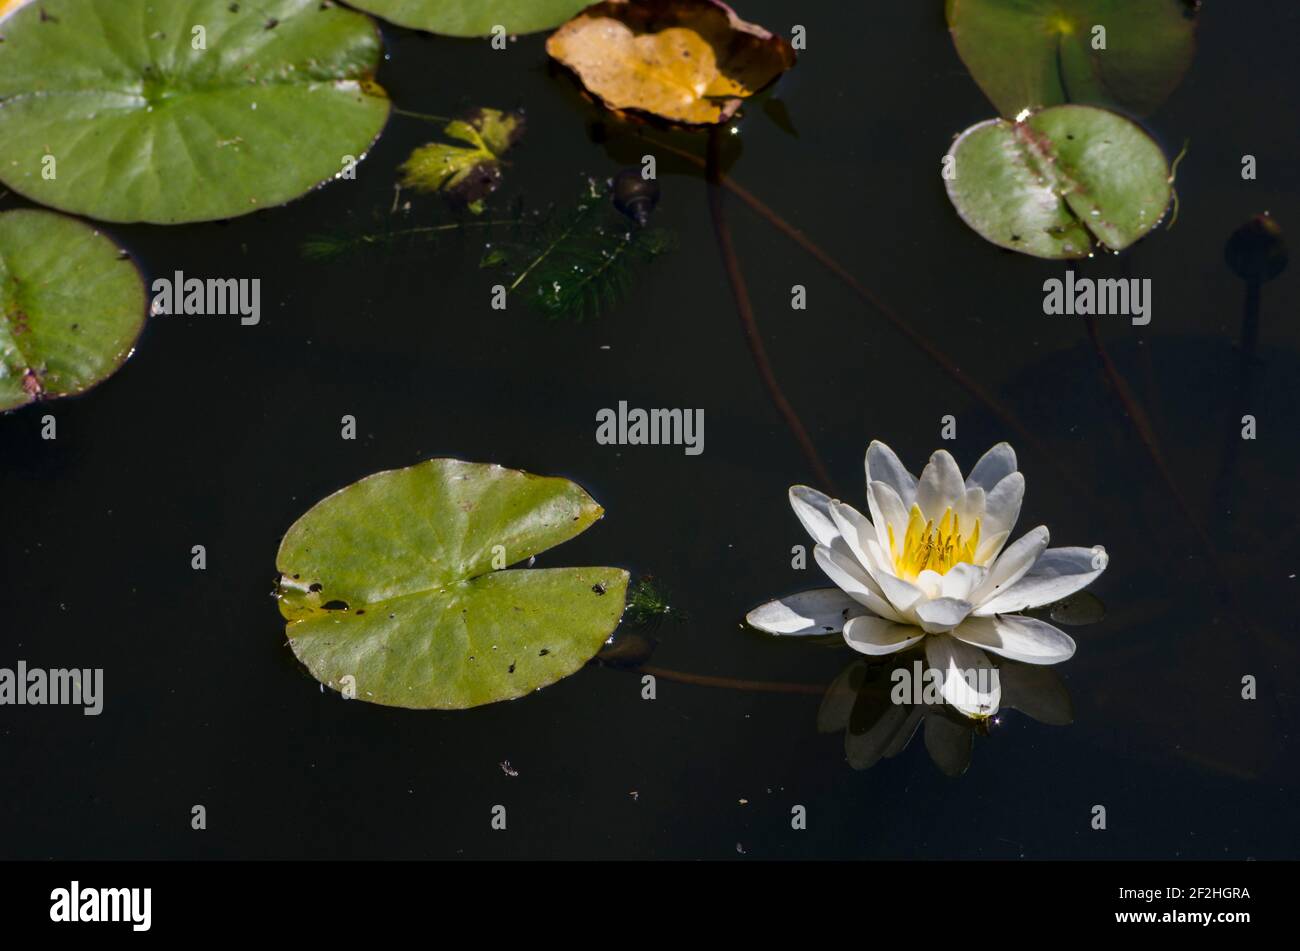 White water lily flower (Nymphaea alba) and leaves in a garden pond, UK Stock Photo